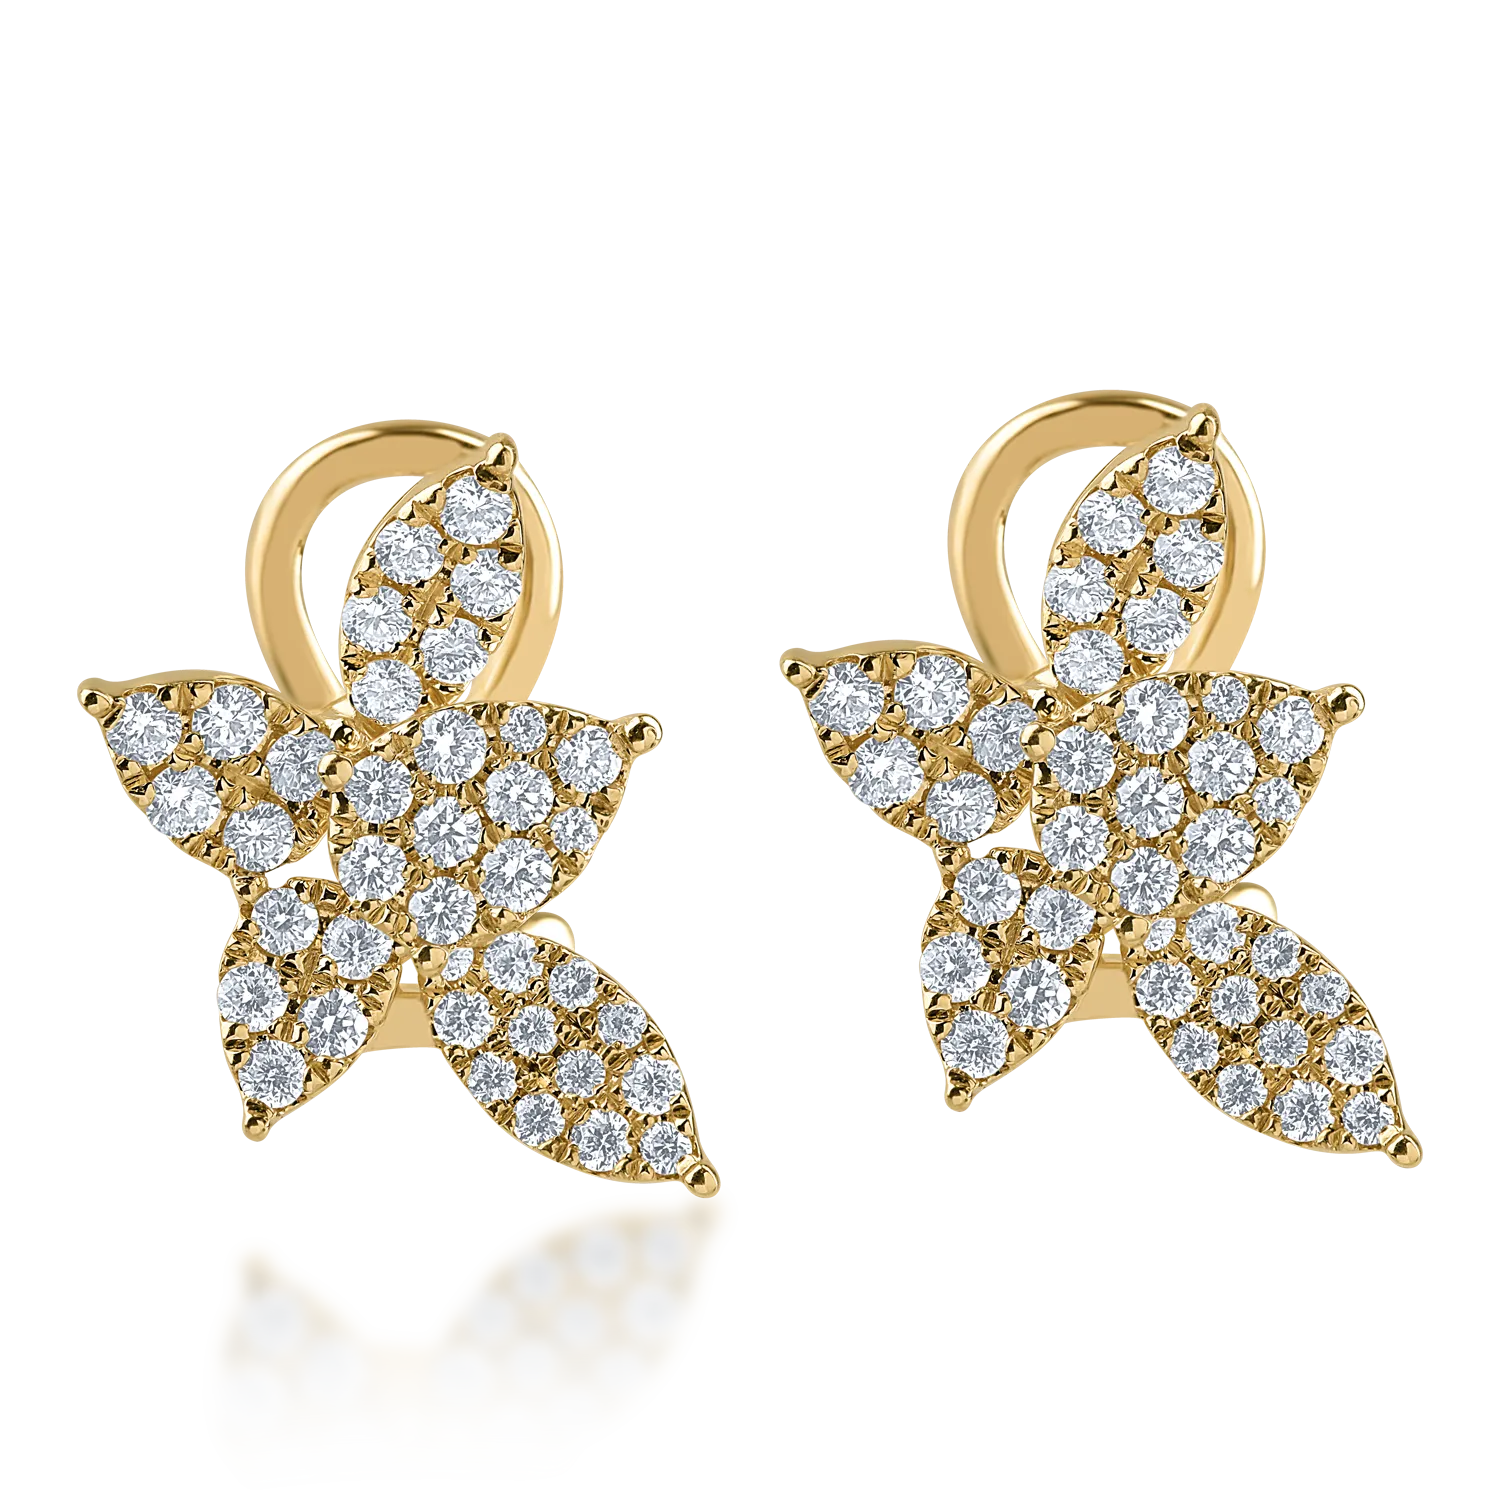 Yellow gold earrings with 0.7ct diamonds